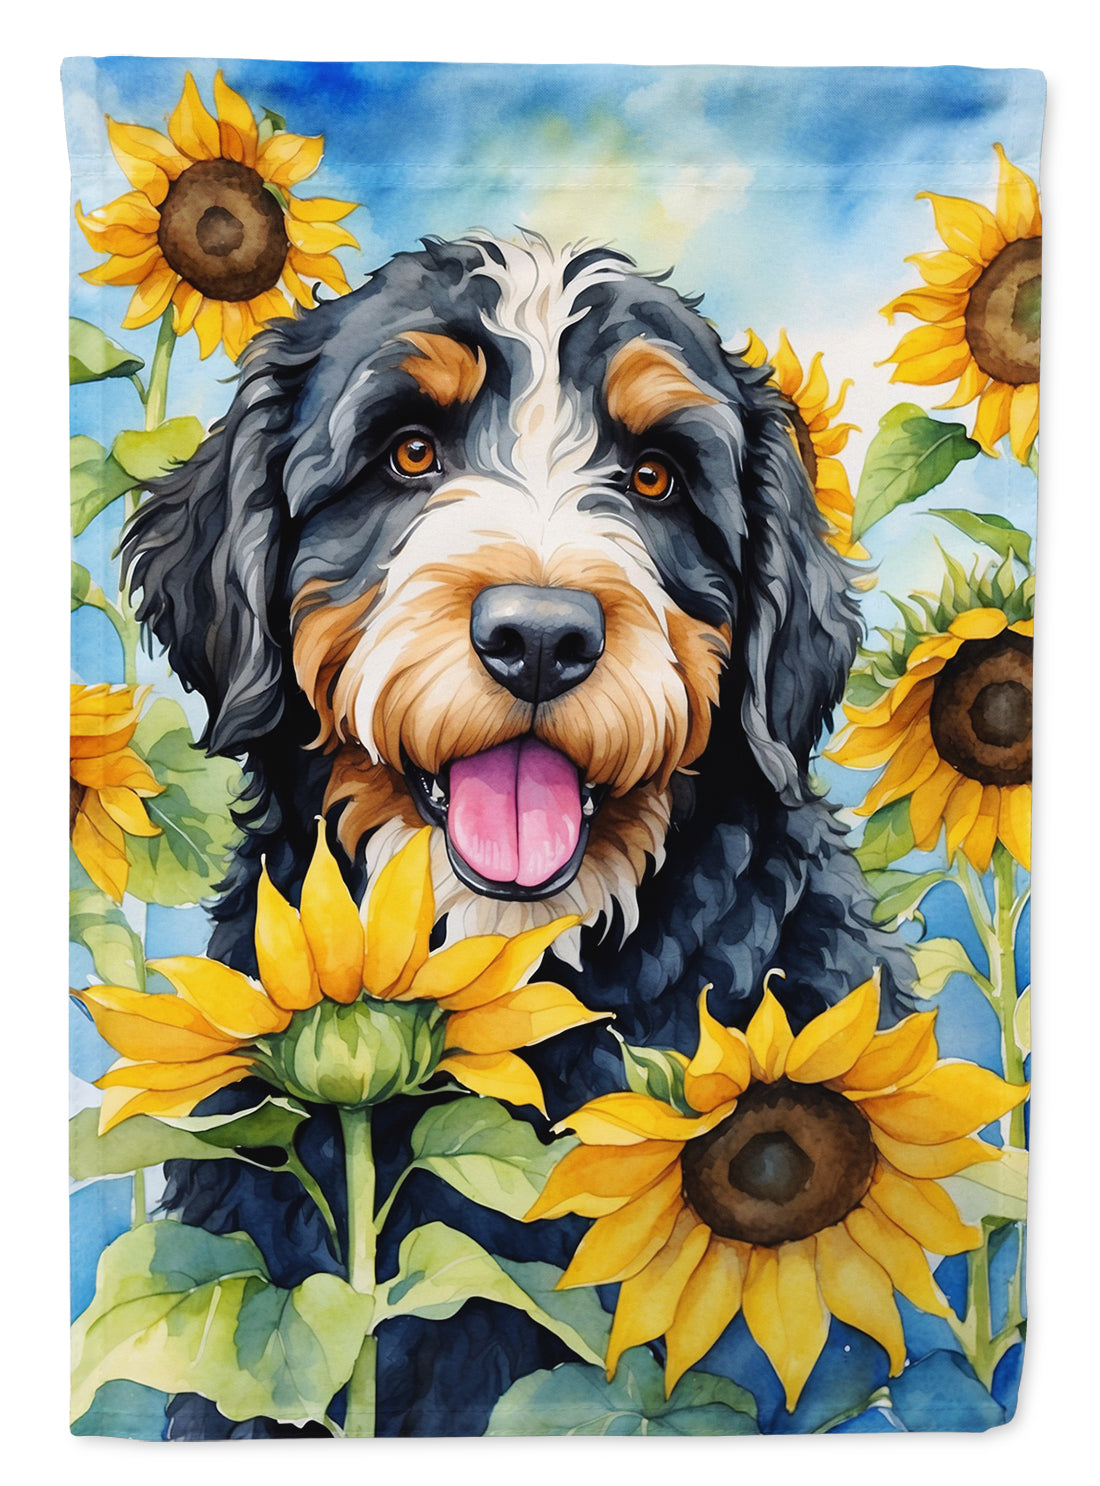 Buy this Bernedoodle in Sunflowers Garden Flag